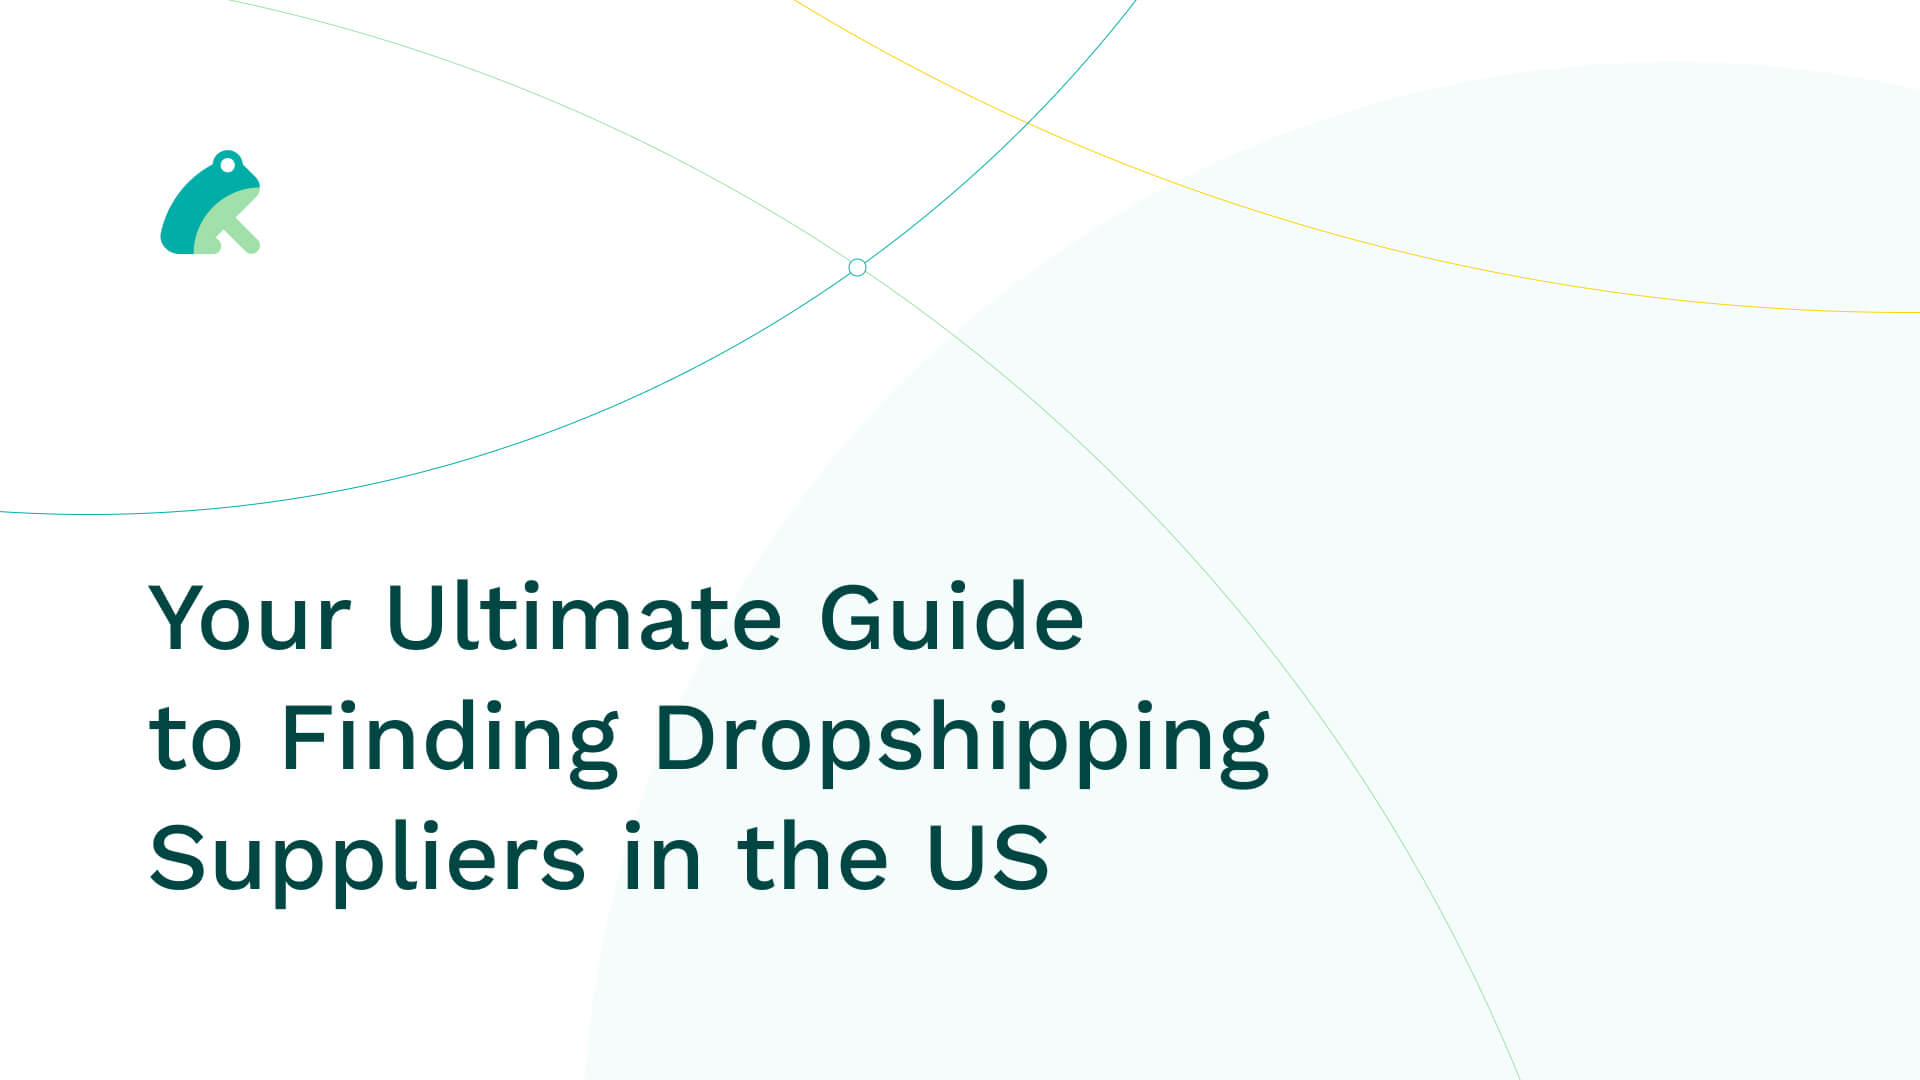 Your Ultimate Guide to Finding Dropshipping Suppliers in the US